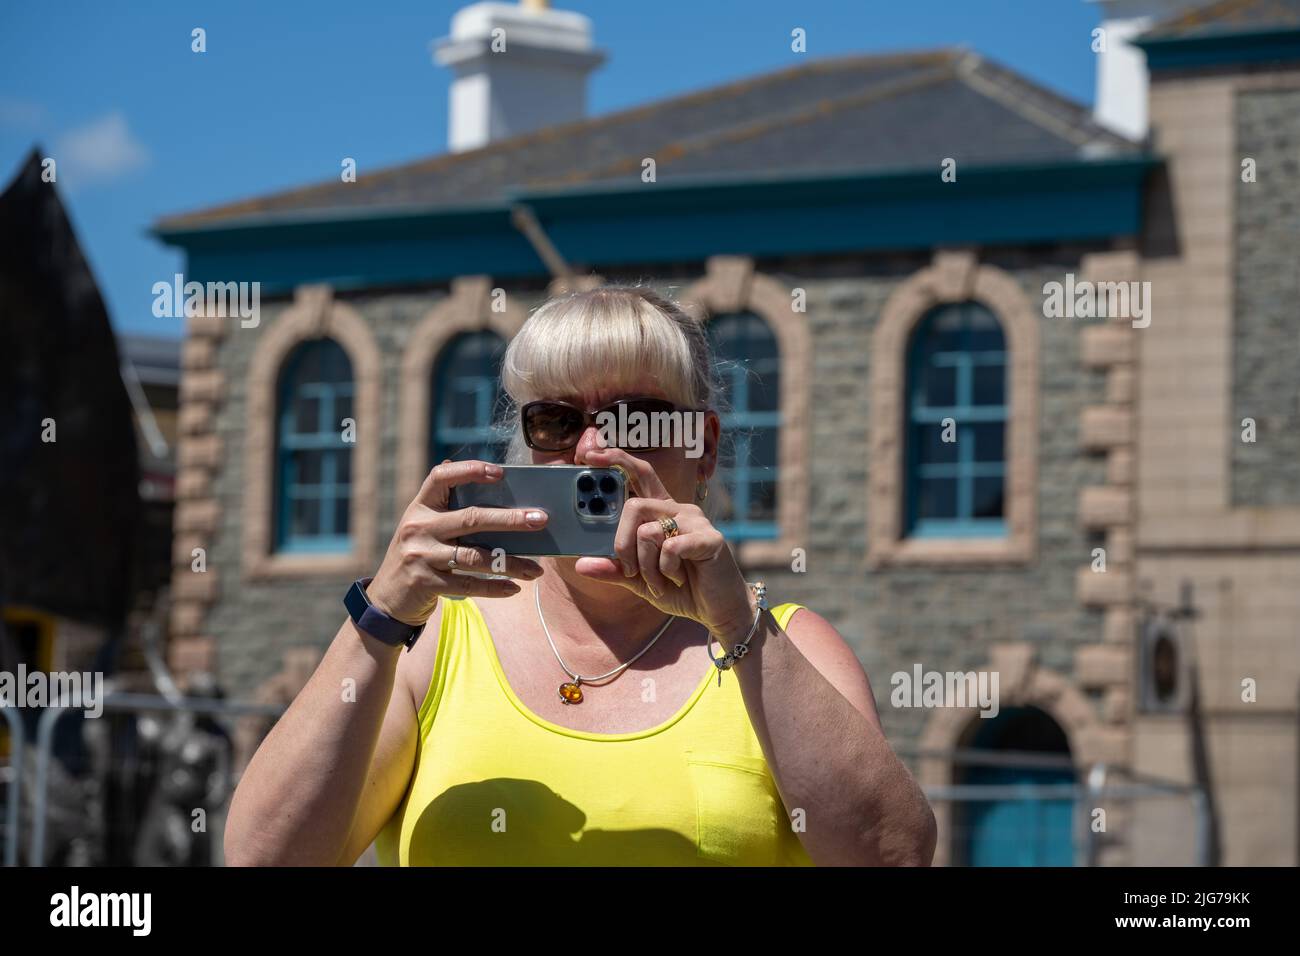 Mature female tourist wearing sunglassed and a yellow top taking photographs on a mobile phone whilst on holiday in summer. Stock Photo